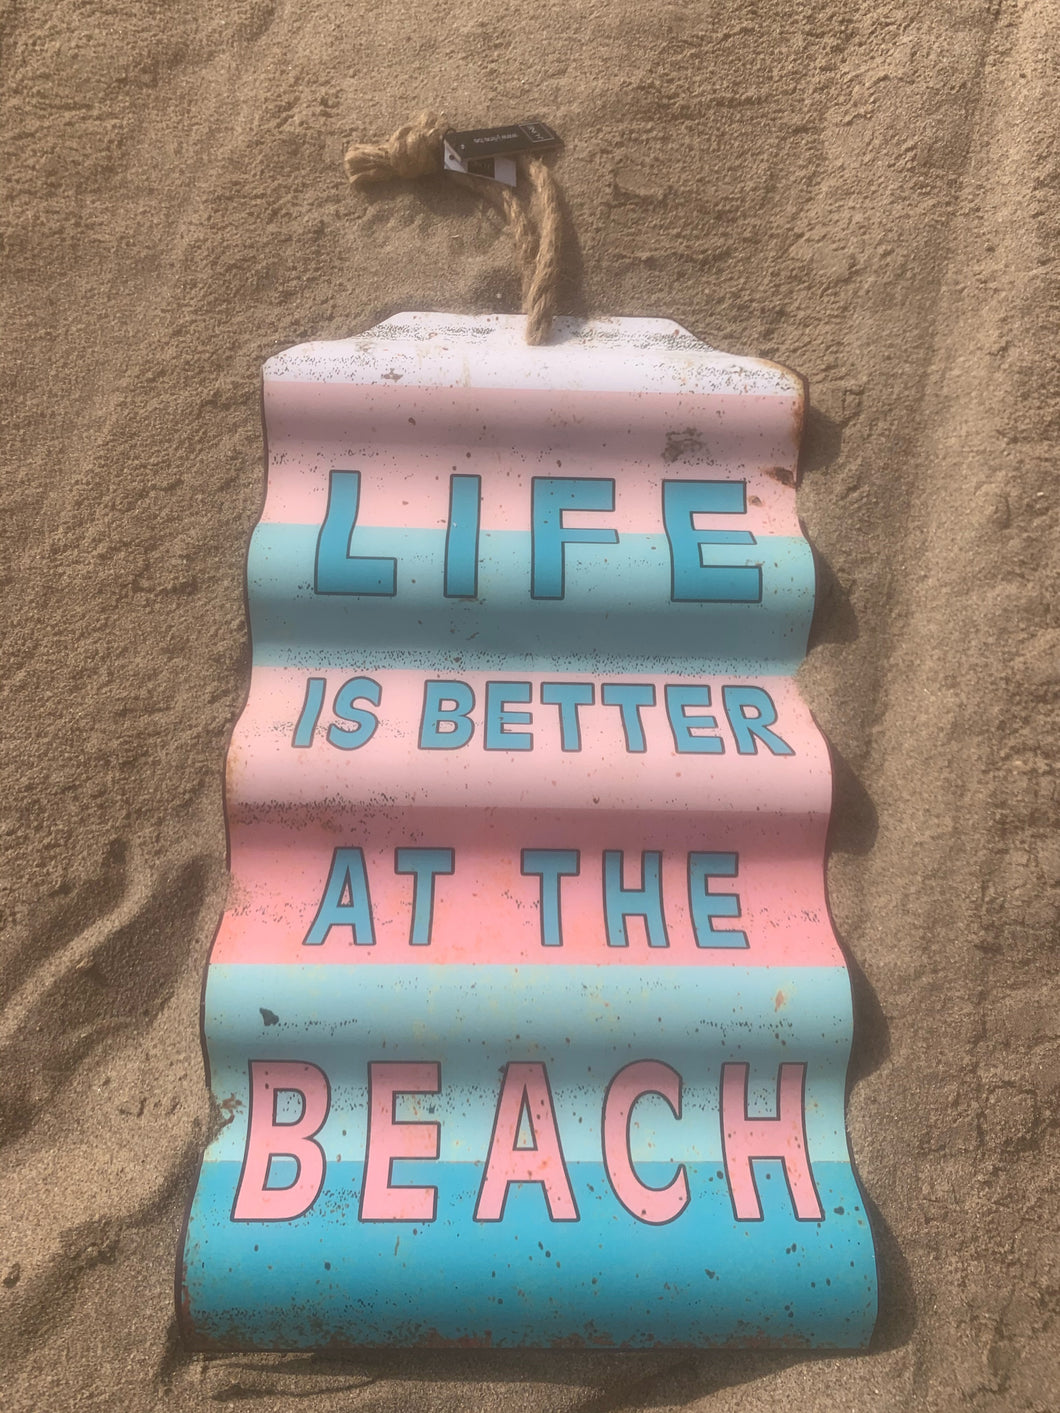 Beach sign metal double sides